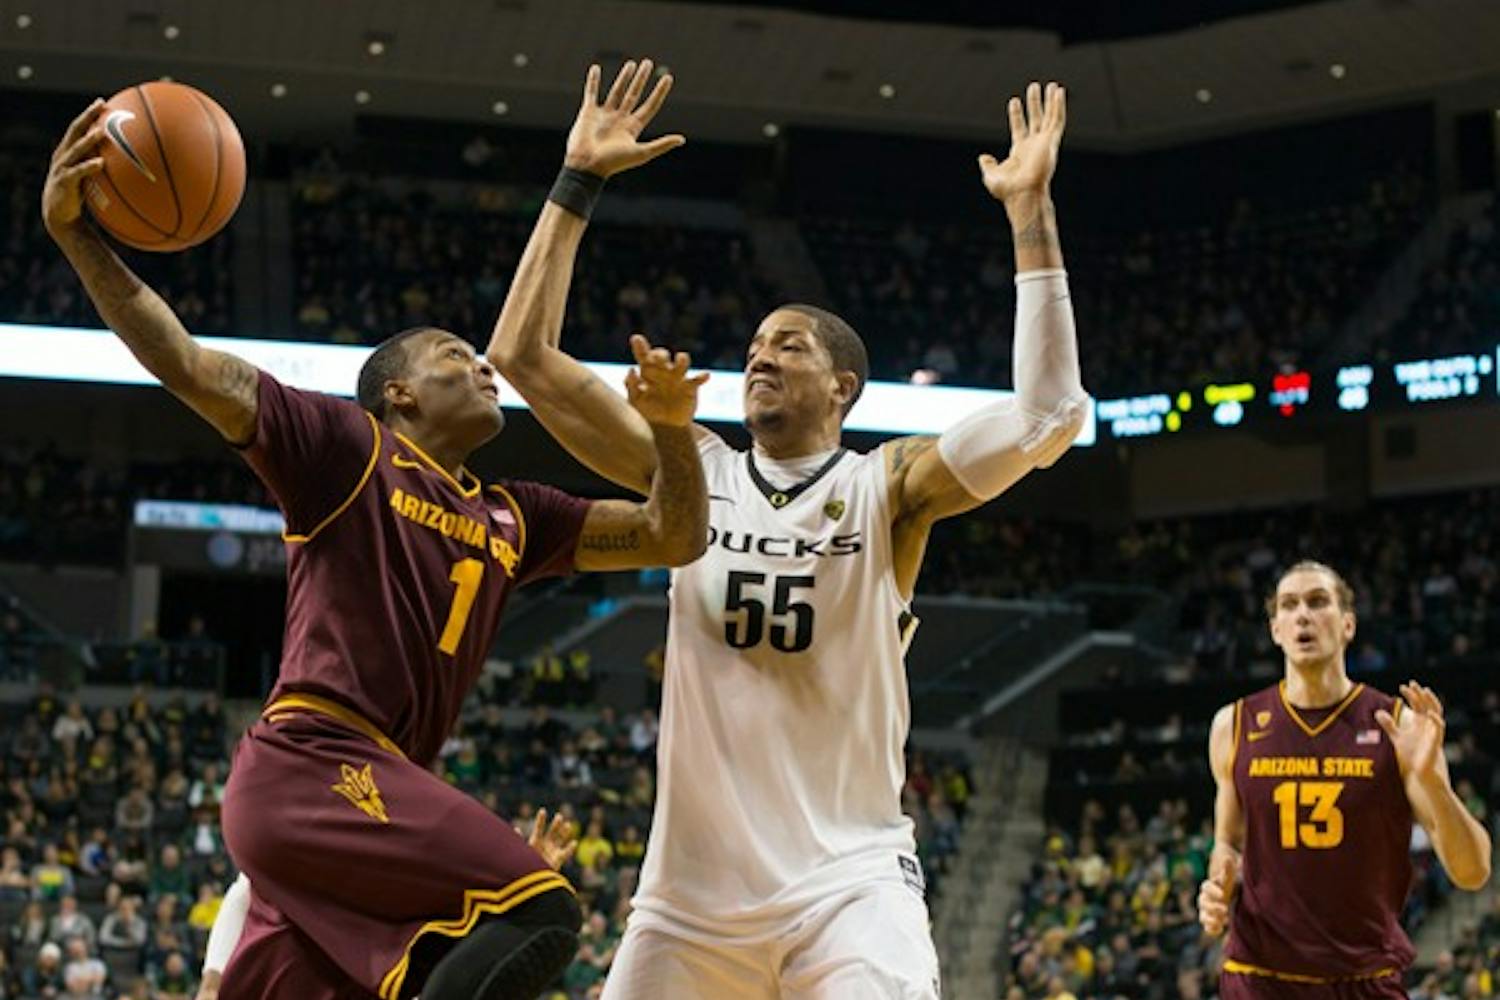 Freshman guard Jahii Carson drives to the basket under heavy pressure from Oregon center Tony Woods. The Oregon Ducks defeated the ASU Sun Devils 68-65 at Matt Knight Arena on January 13th, 2013. (Courtesy of Michael Arellano)